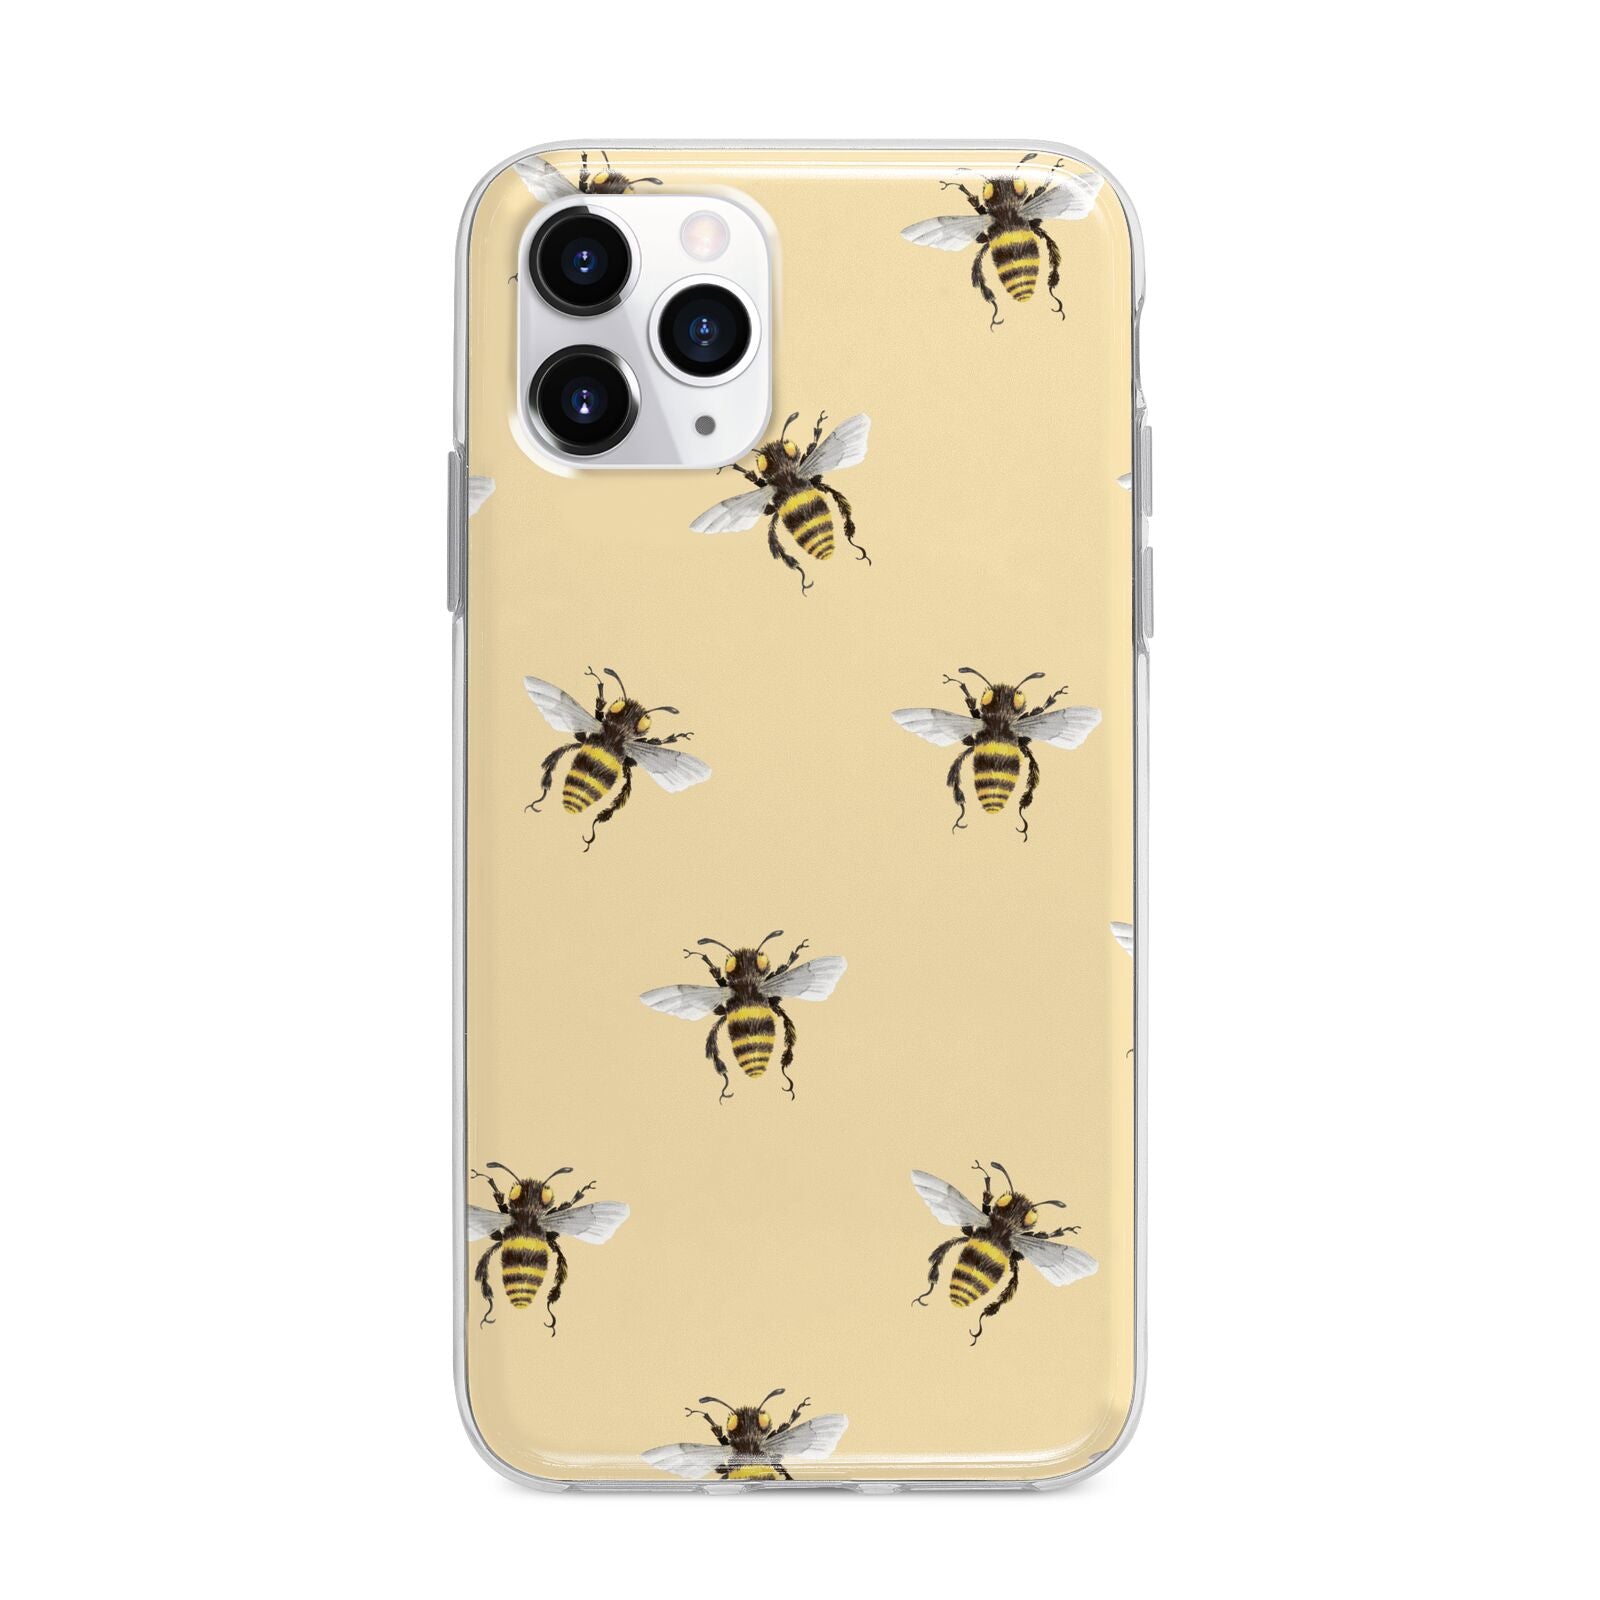 Bee Illustrations Apple iPhone 11 Pro Max in Silver with Bumper Case